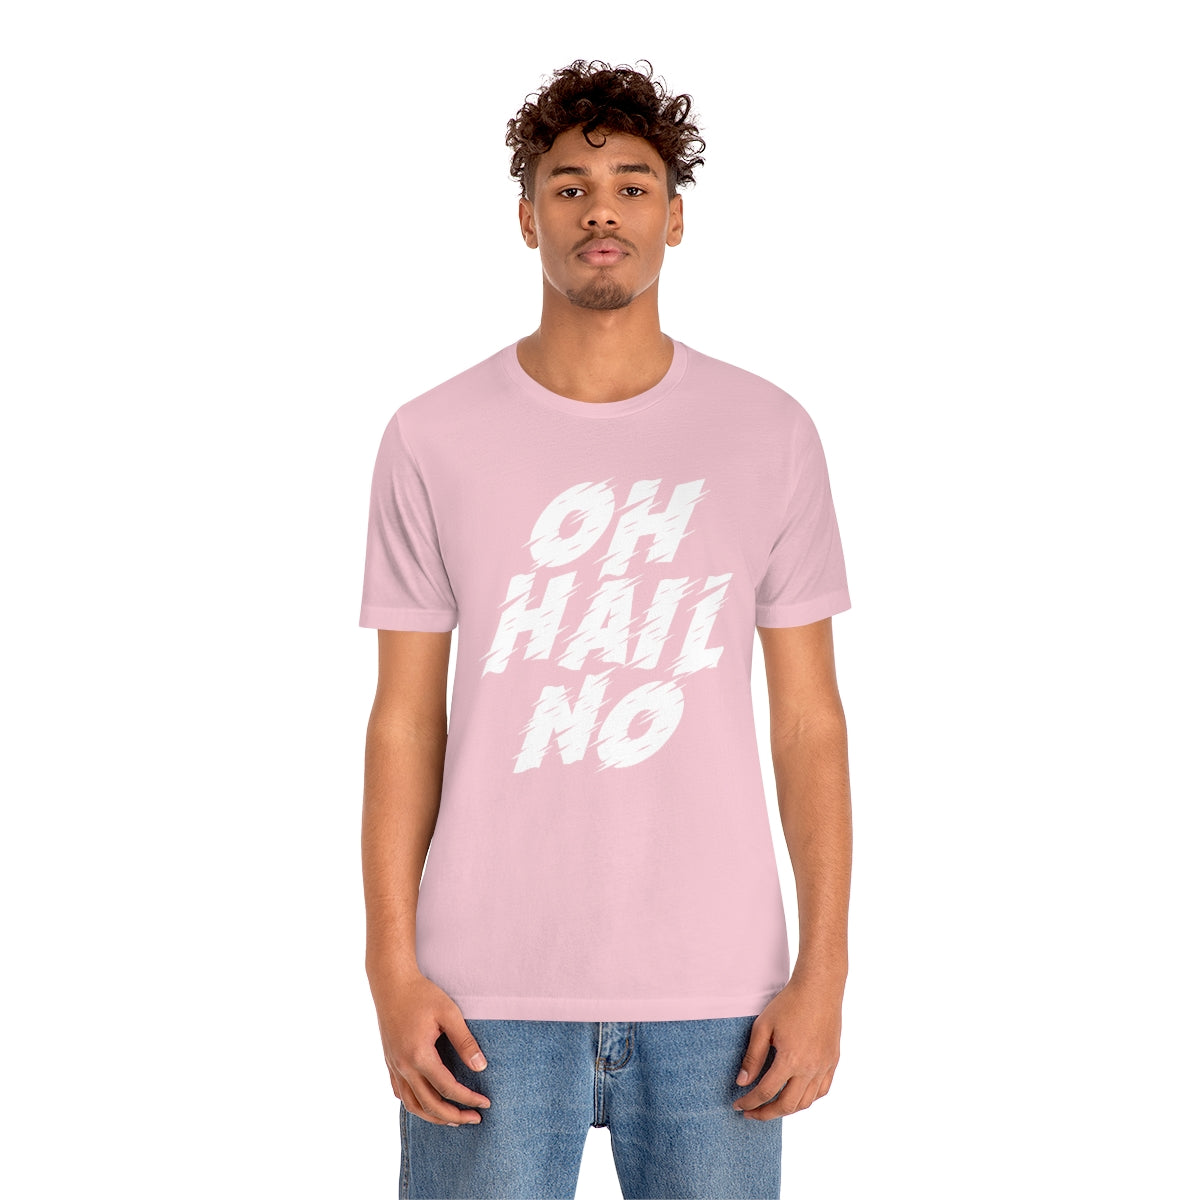 Oh Hail No Tee Designs Helicity –